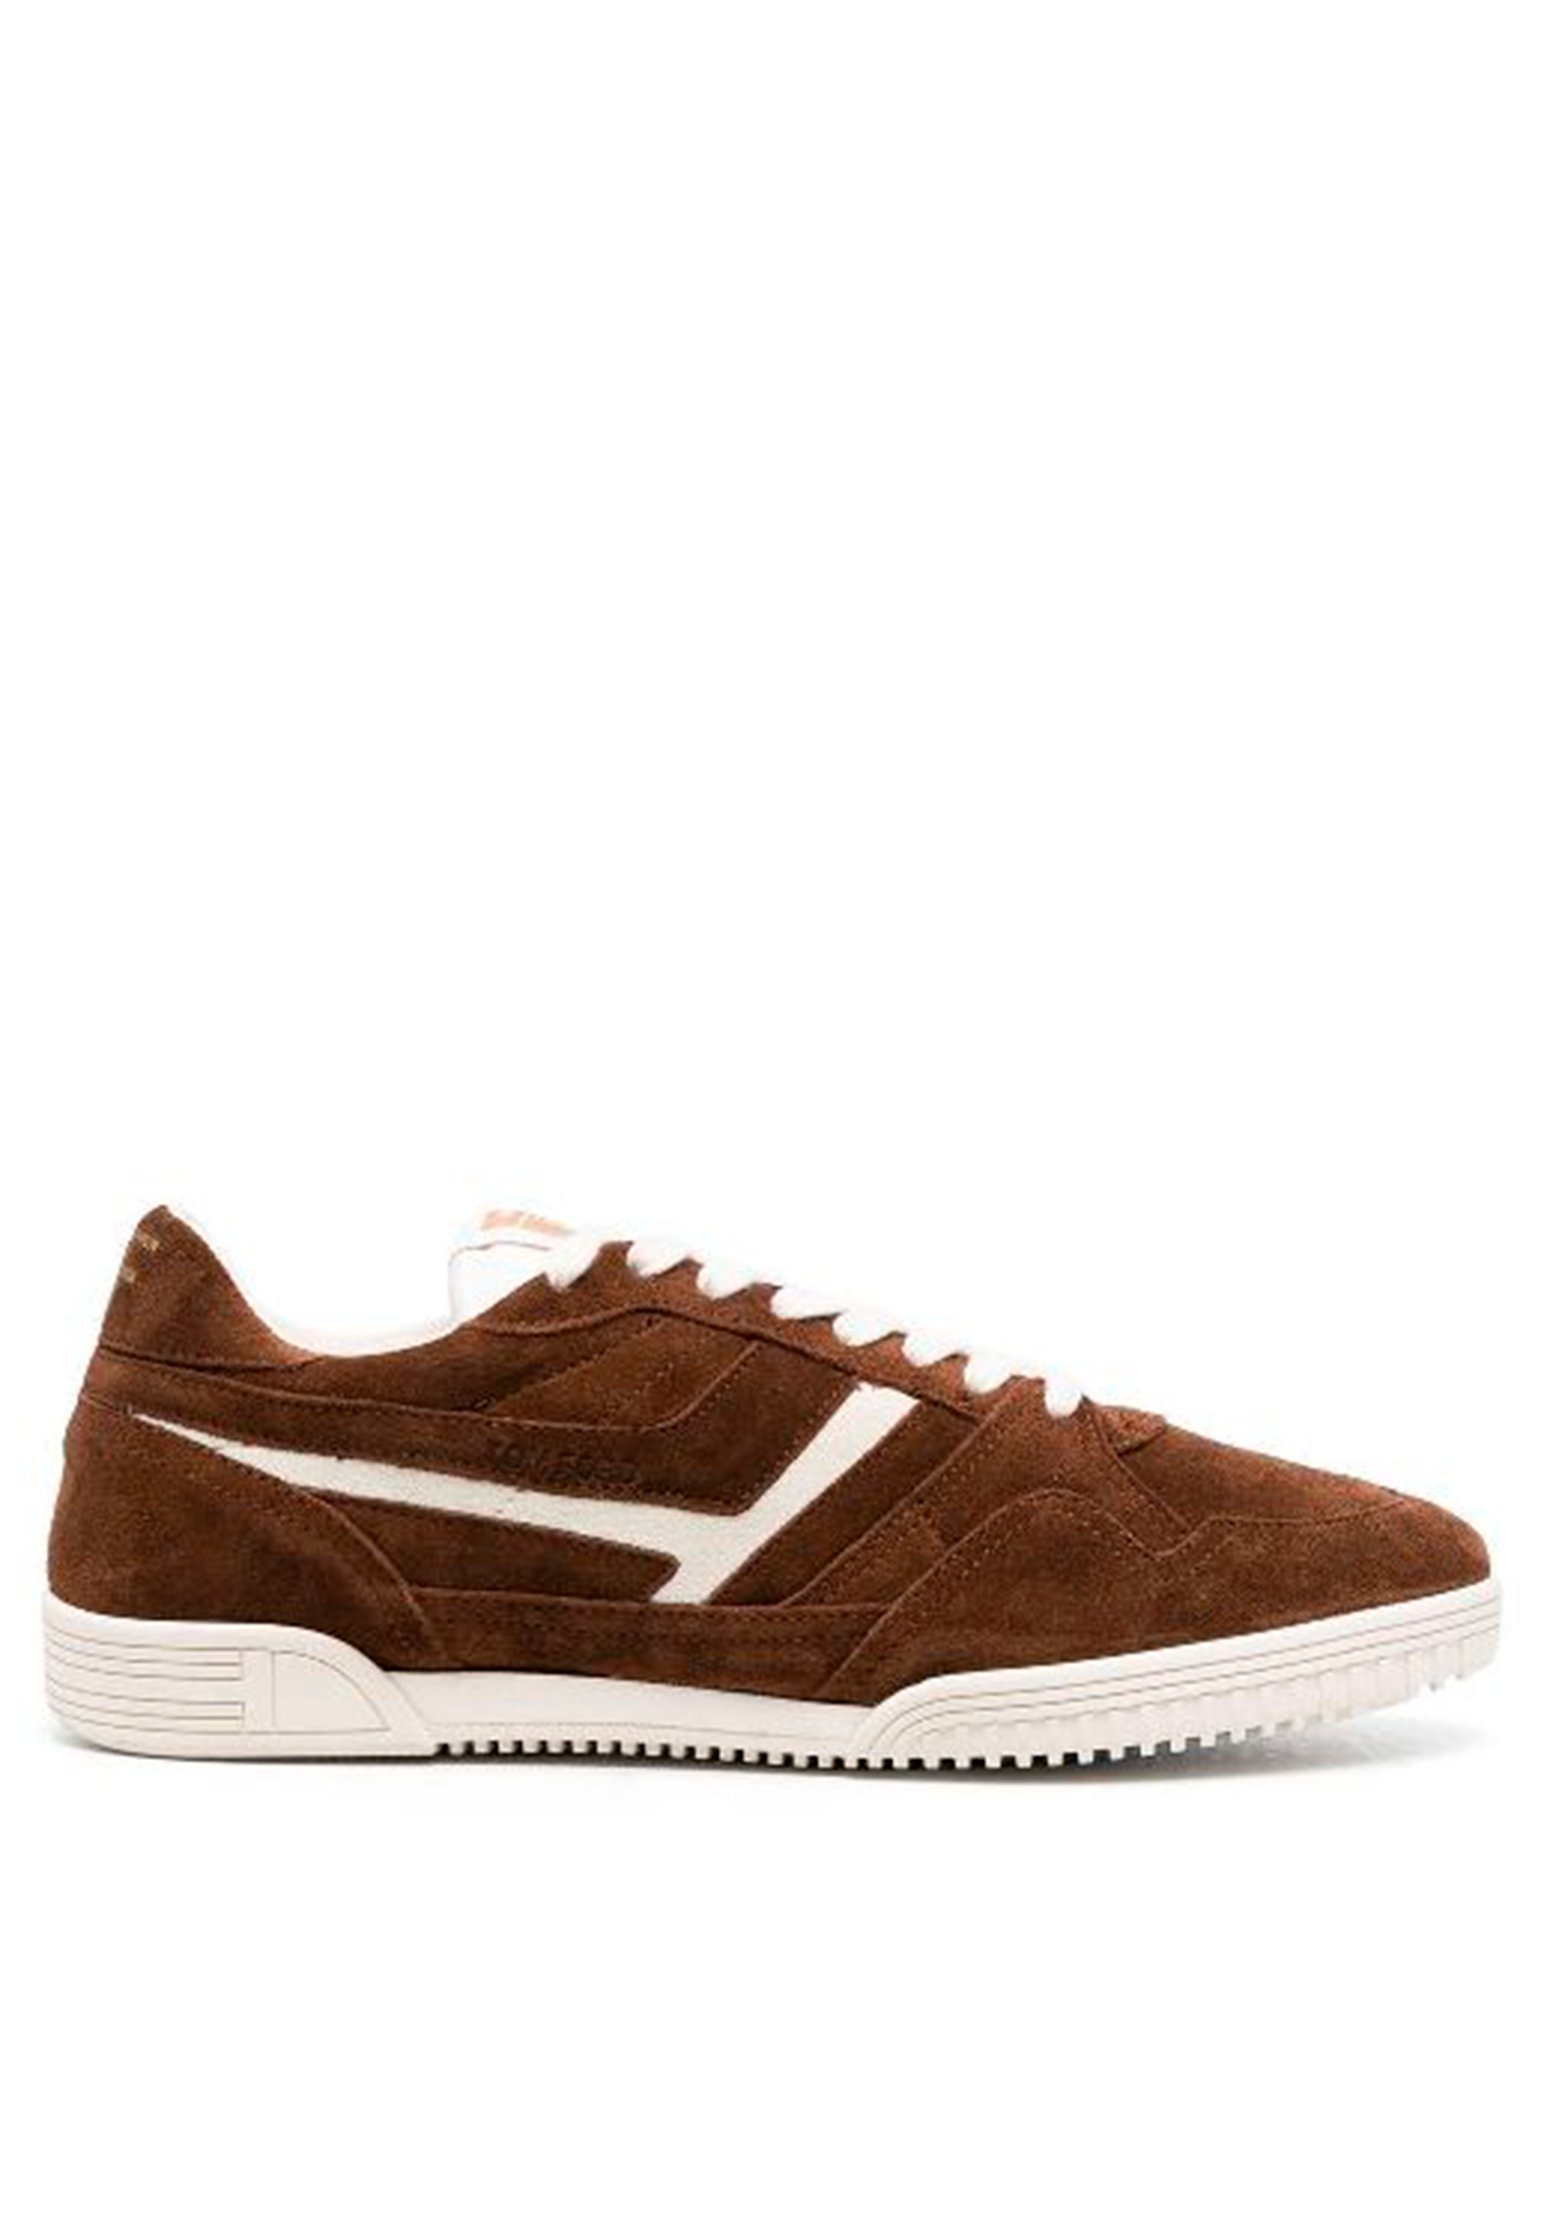 Sneakers TOM FORD color: brown buy online store of branded clothing Allure